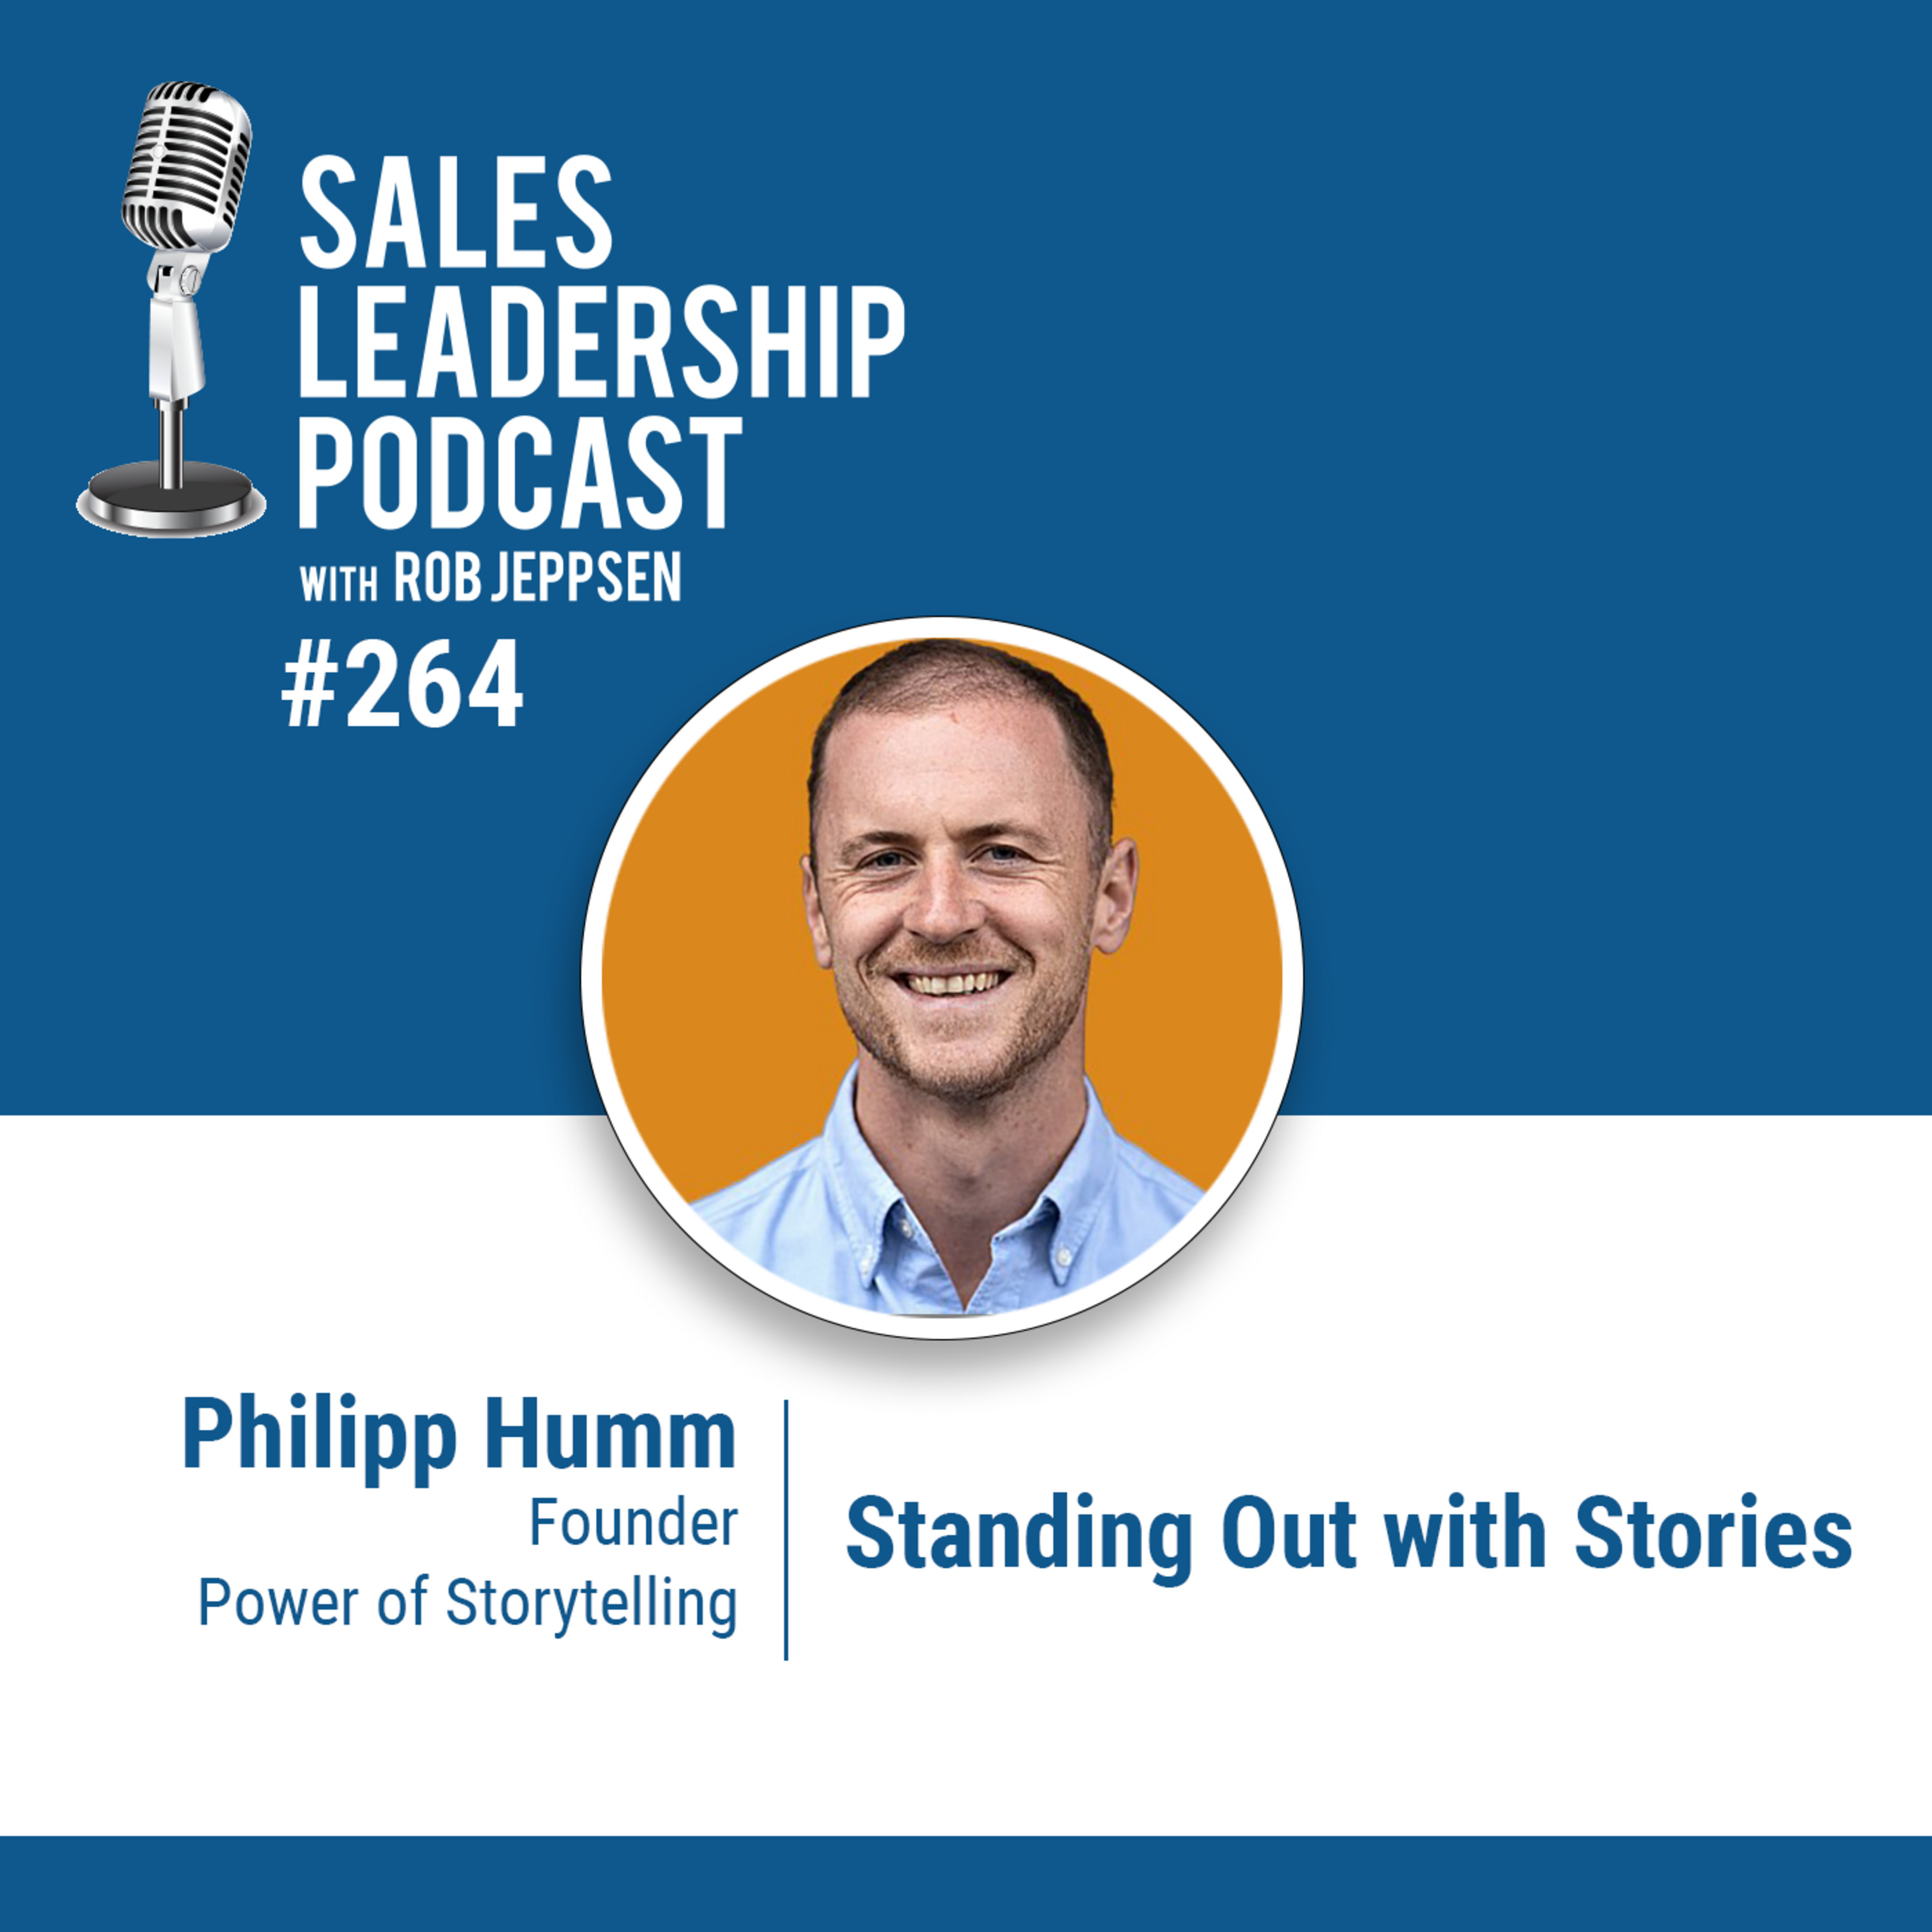 Episode 264: Philipp Humm, Founder of Power of Storytelling: Stand Out with Stories